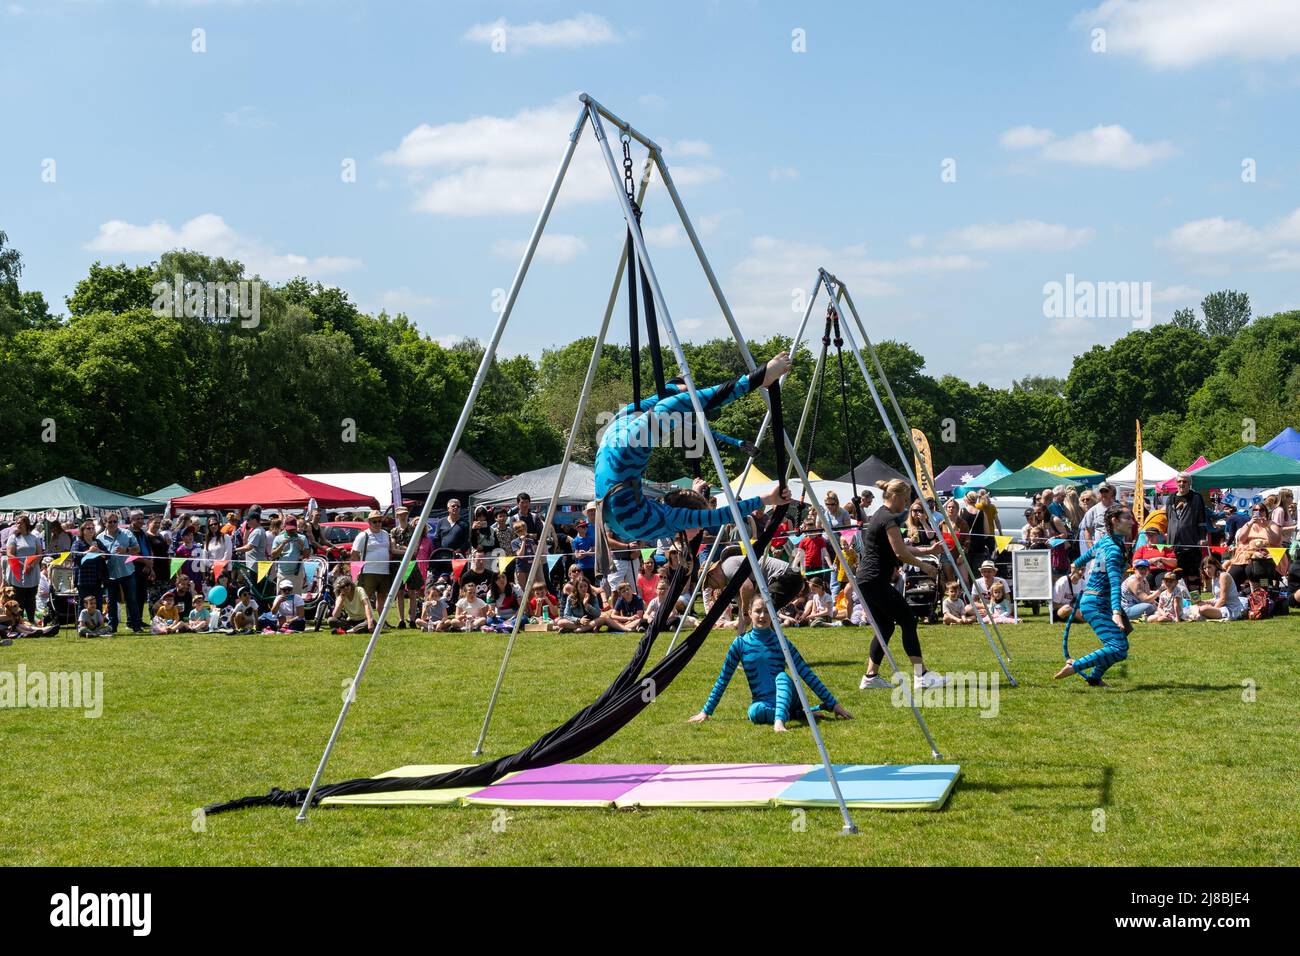 Acrobatics display, an arena event at the Surrey Heath Show in Frimley Lodge Park, Surrey, England, UK, May 2022. Stock Photo